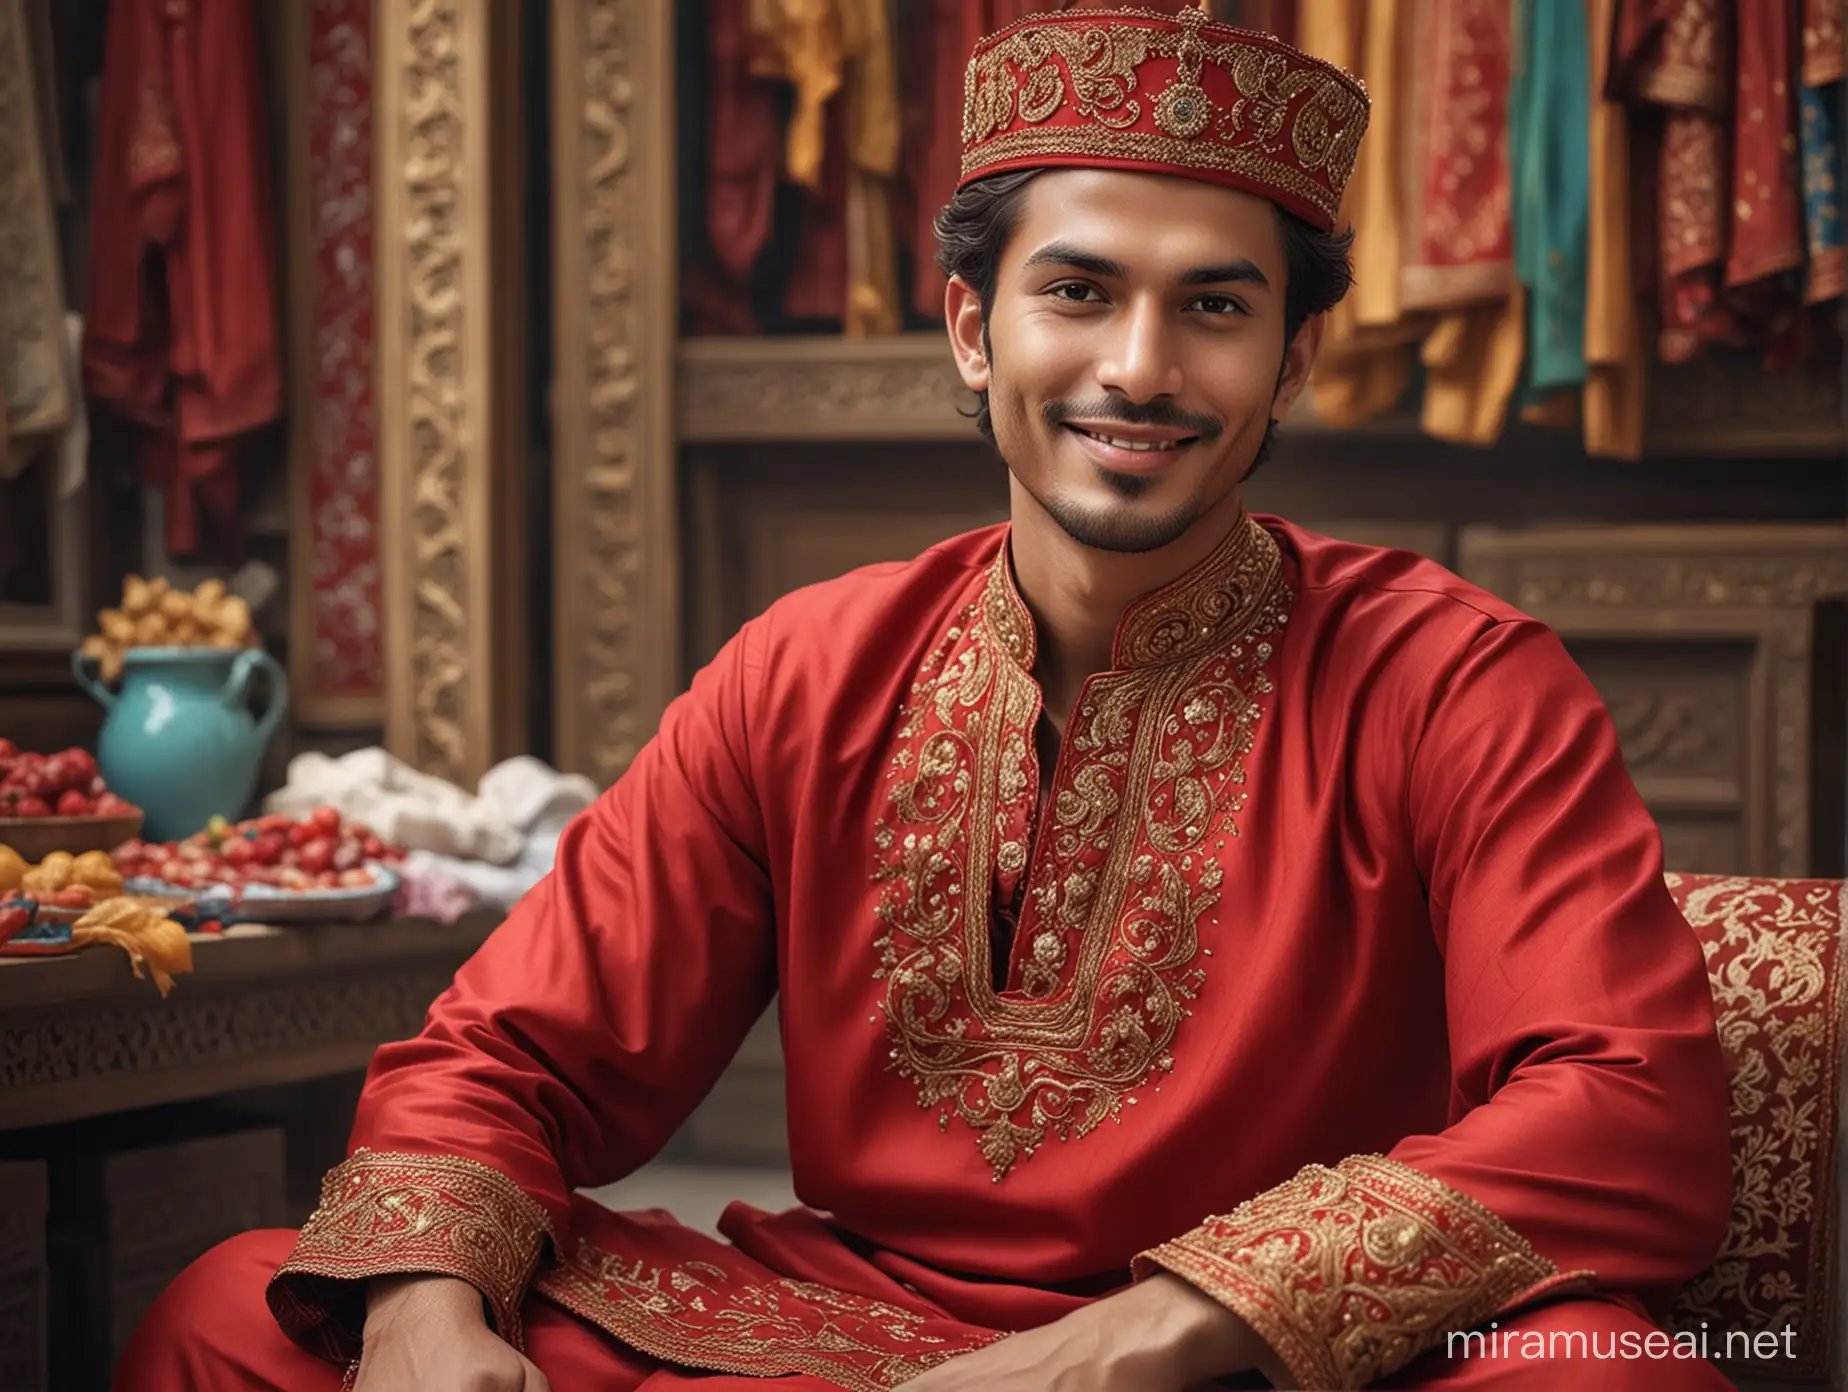 Realistic Red Devil in Traditional Pakistani Attire at an Asian Market